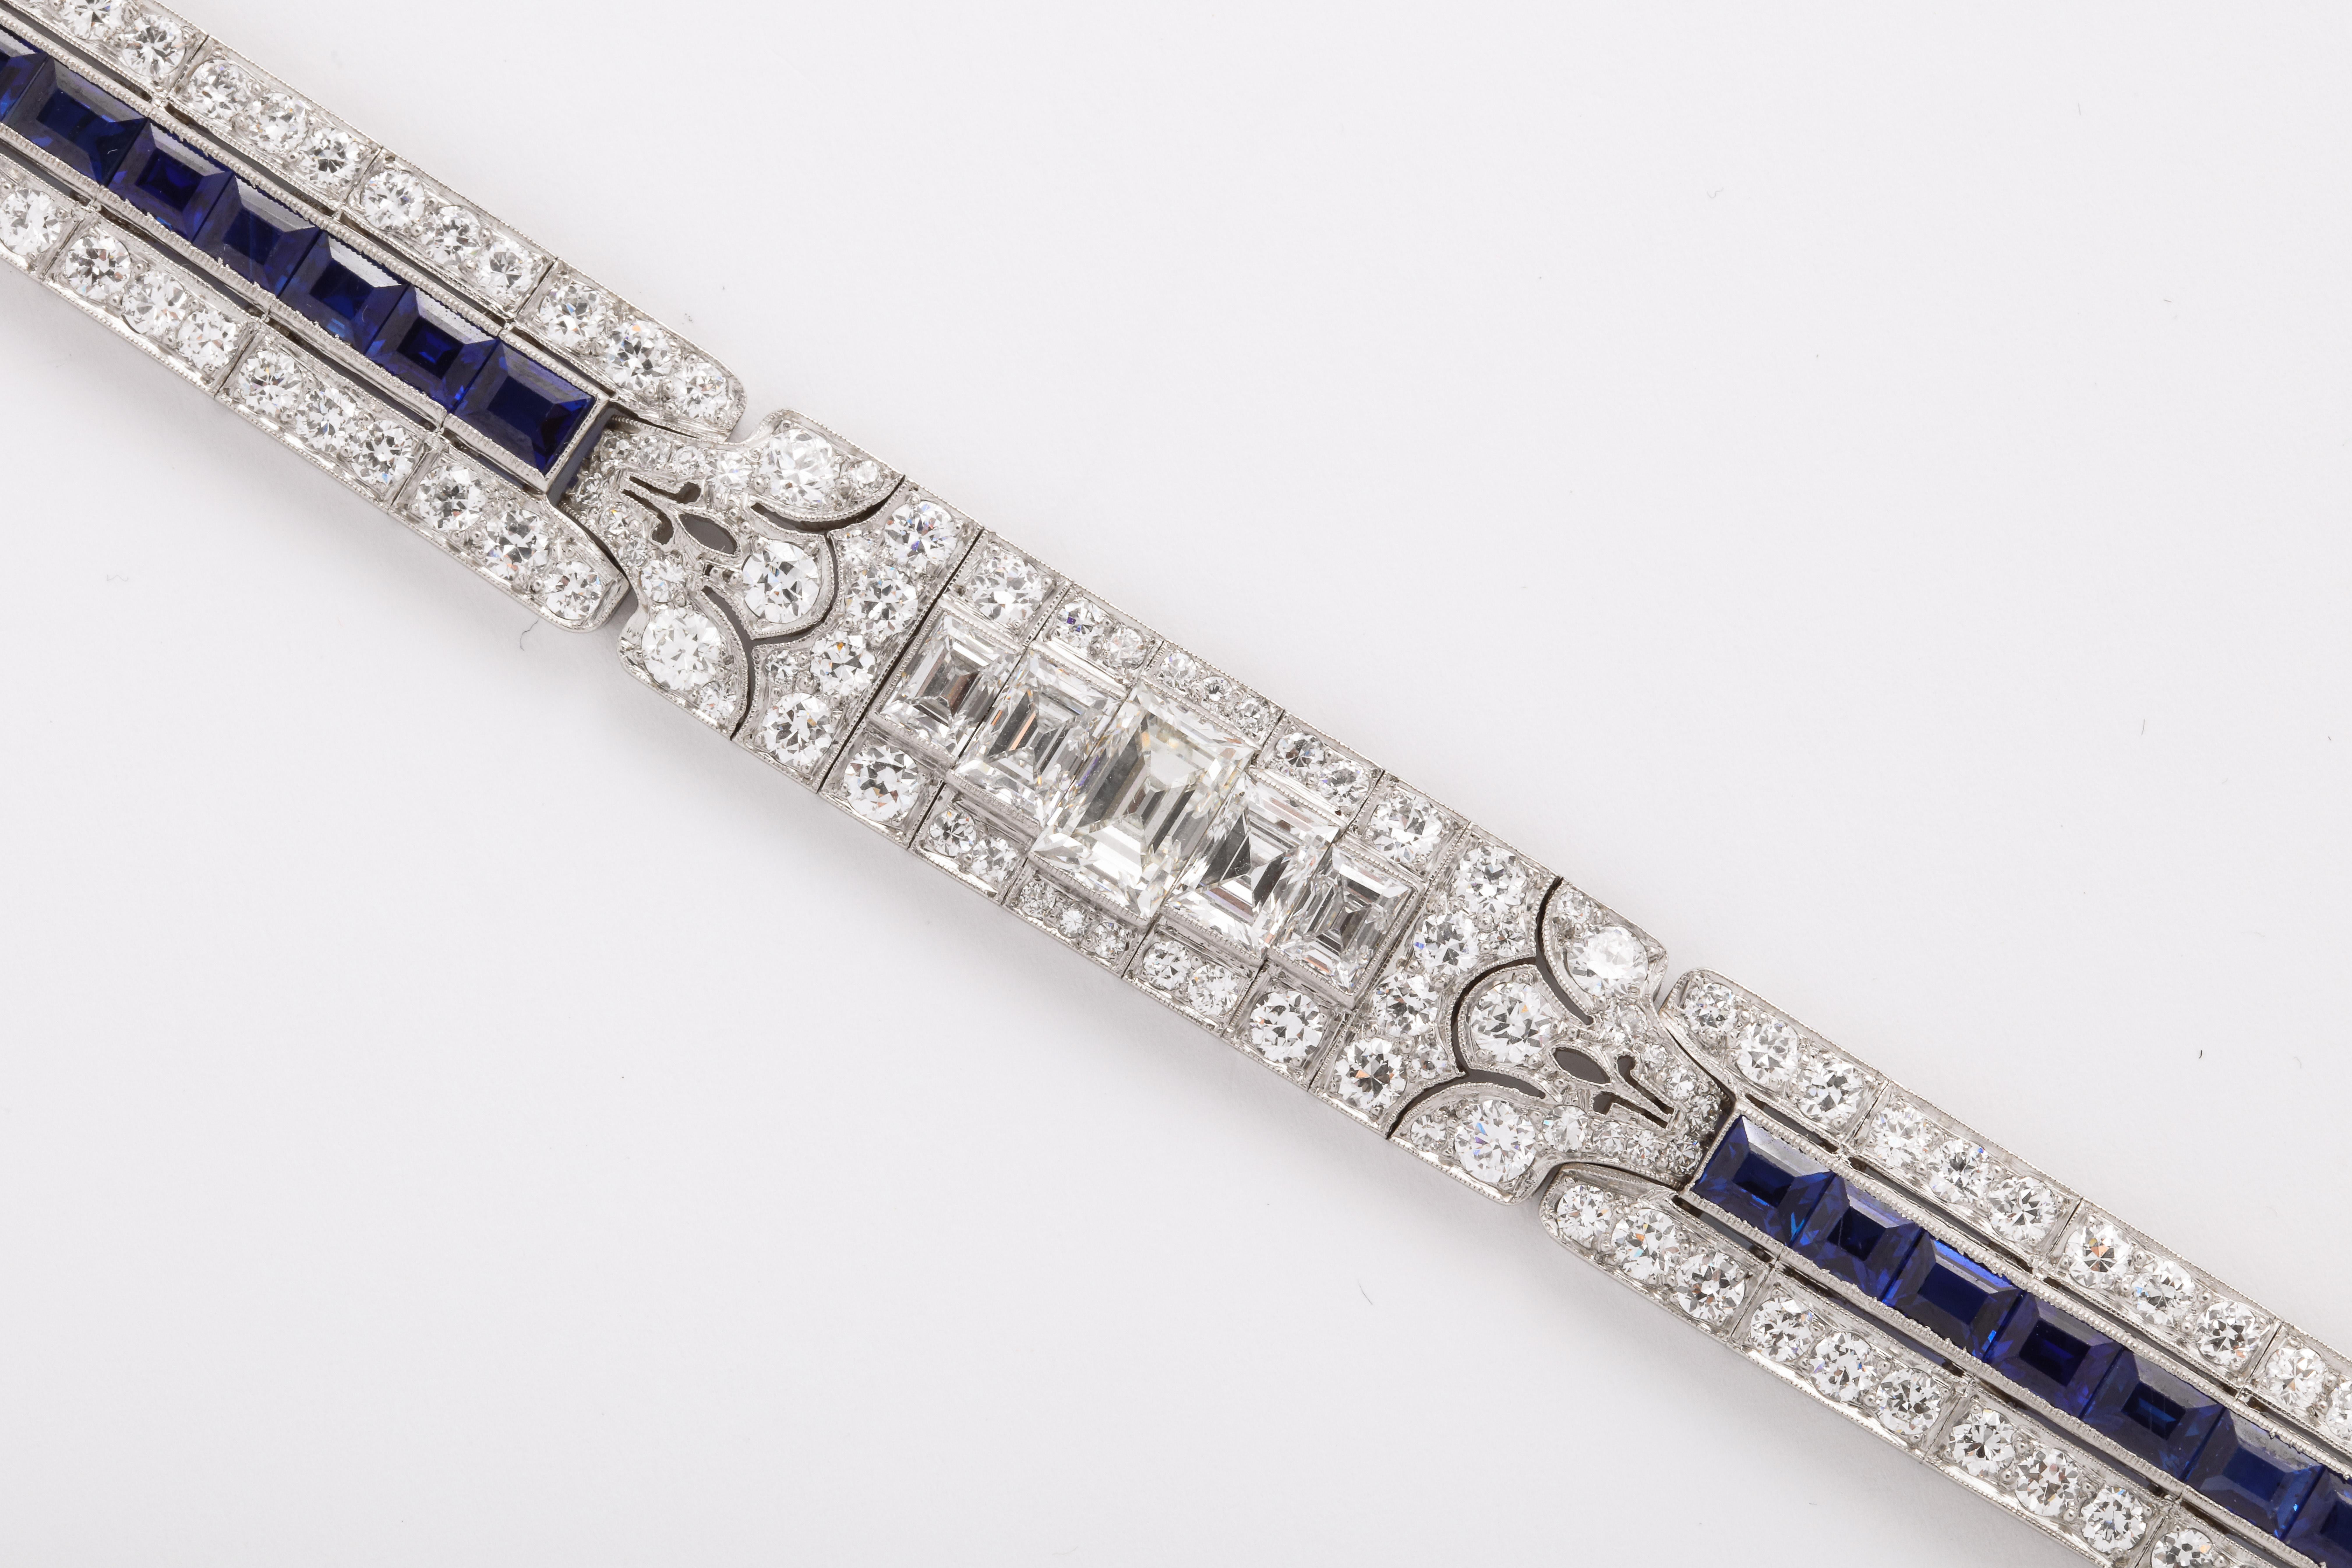 Platinum, Diamond & Sapphire Line Bracelet
by Tiffany & Co. 
A rich line of step-cut square shaped sapphires weighing an estimated 14.50 carats bring your eye to a beautifully designed all diamond centerpiece, featuring 5 emerald cut diamonds that